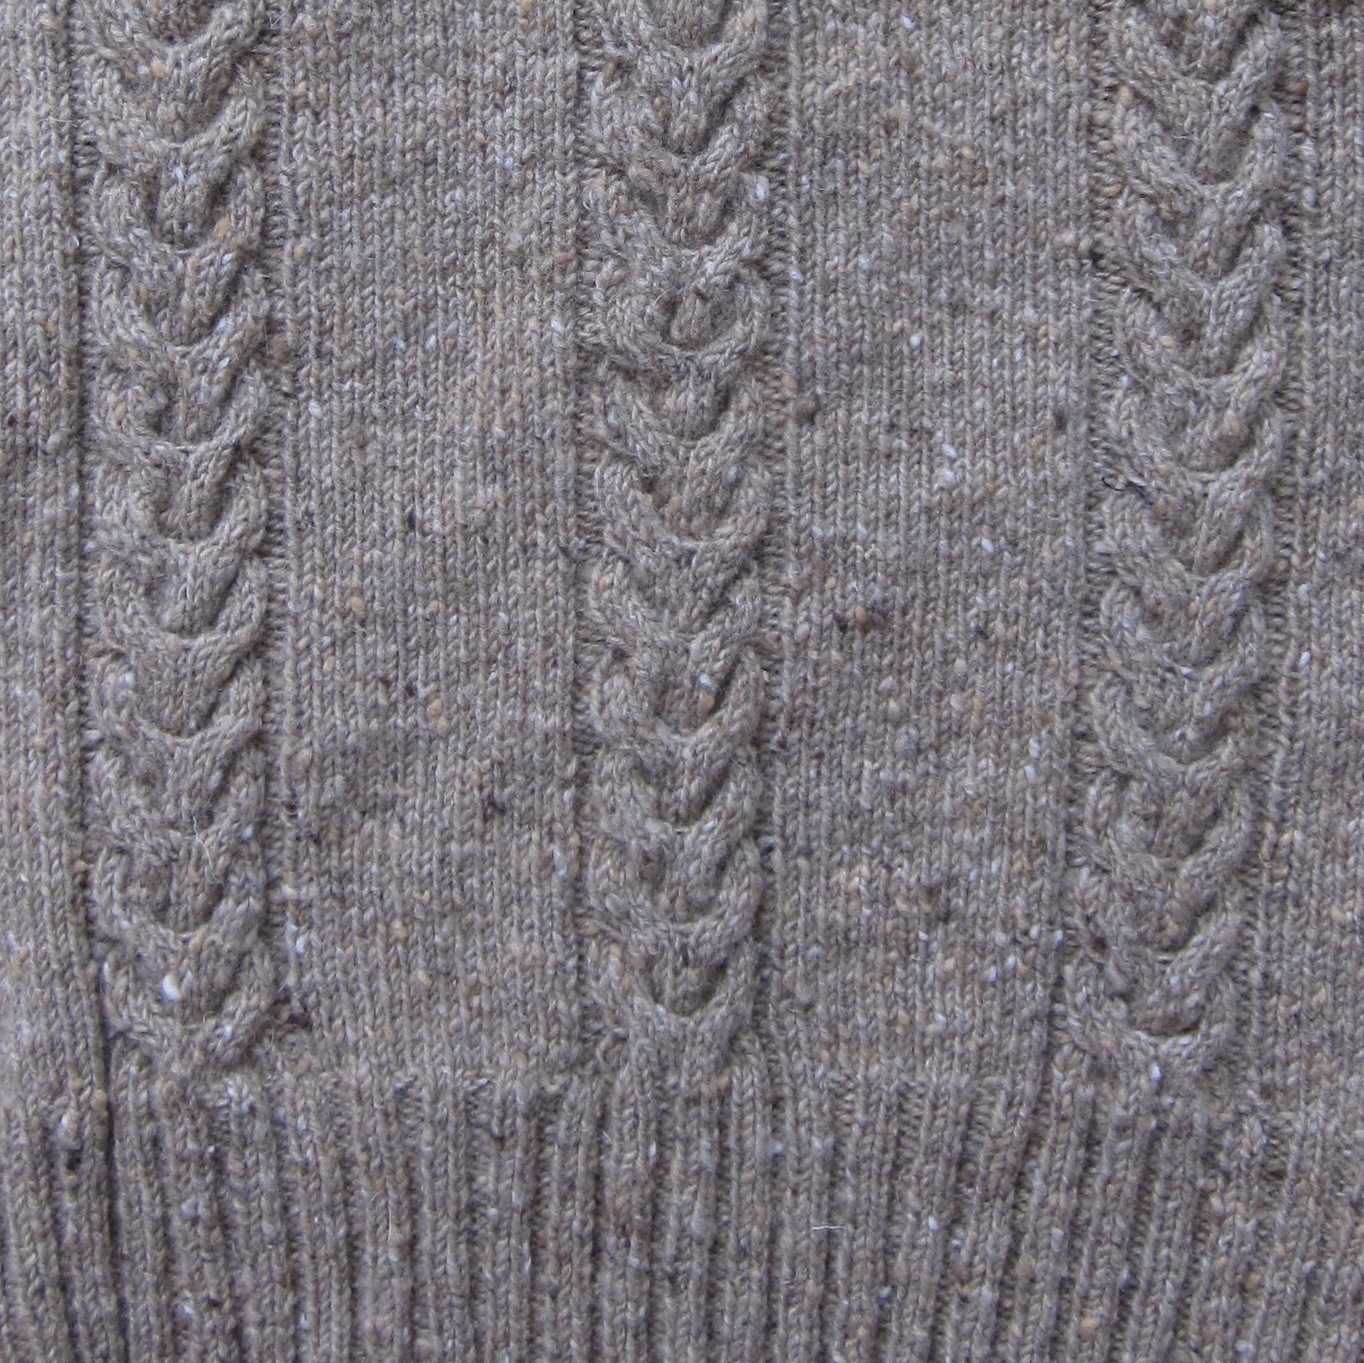 hand knit detail